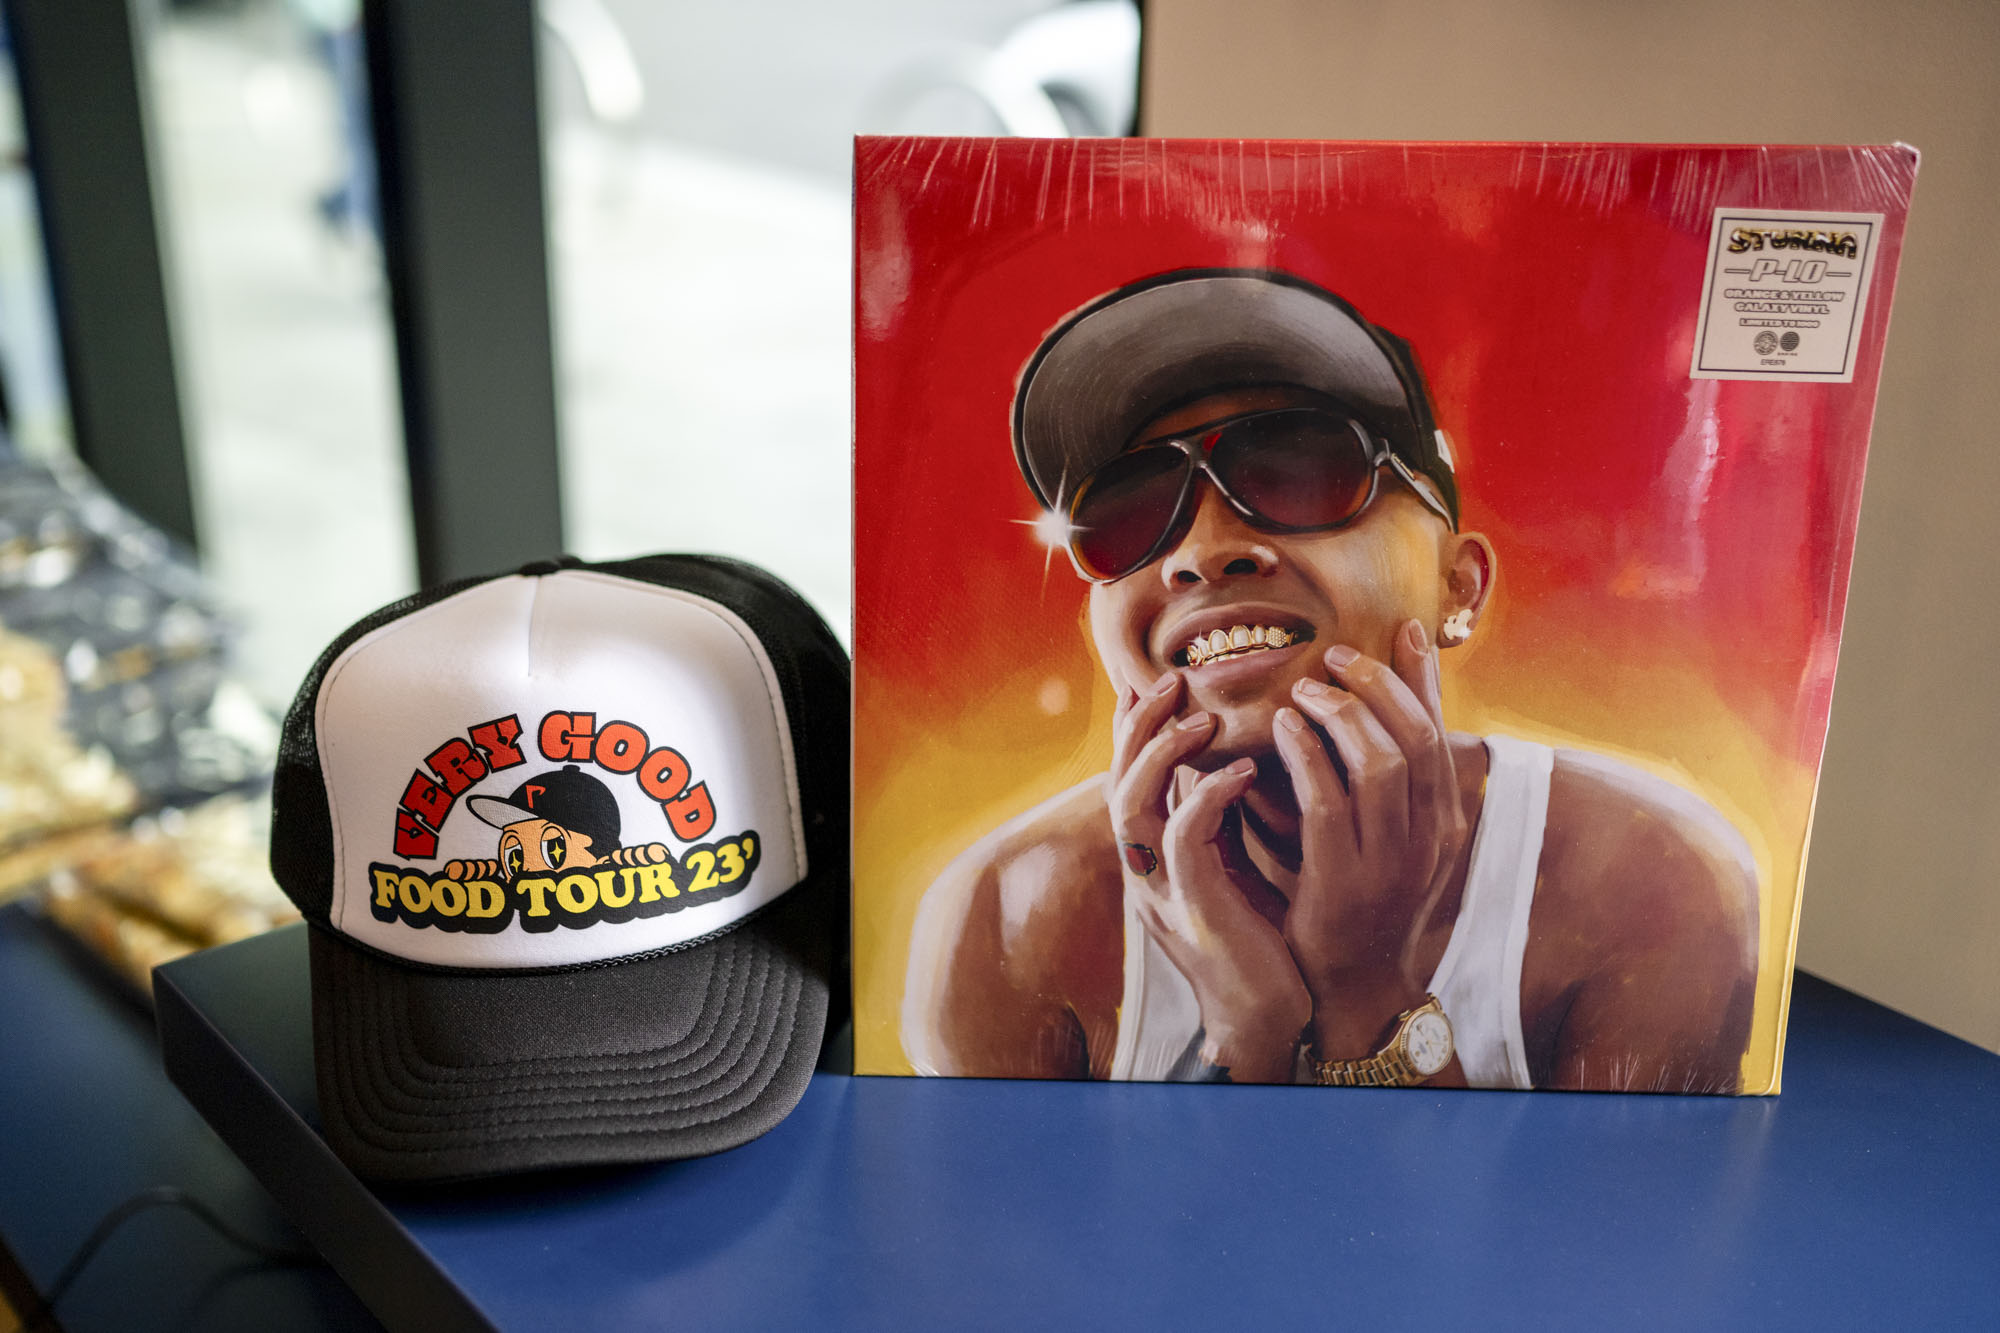 A vinyl album with the photo of a person in a baseball cap on it beside a trucker hat with the words "Very Good Food Tour 23'" written on it.